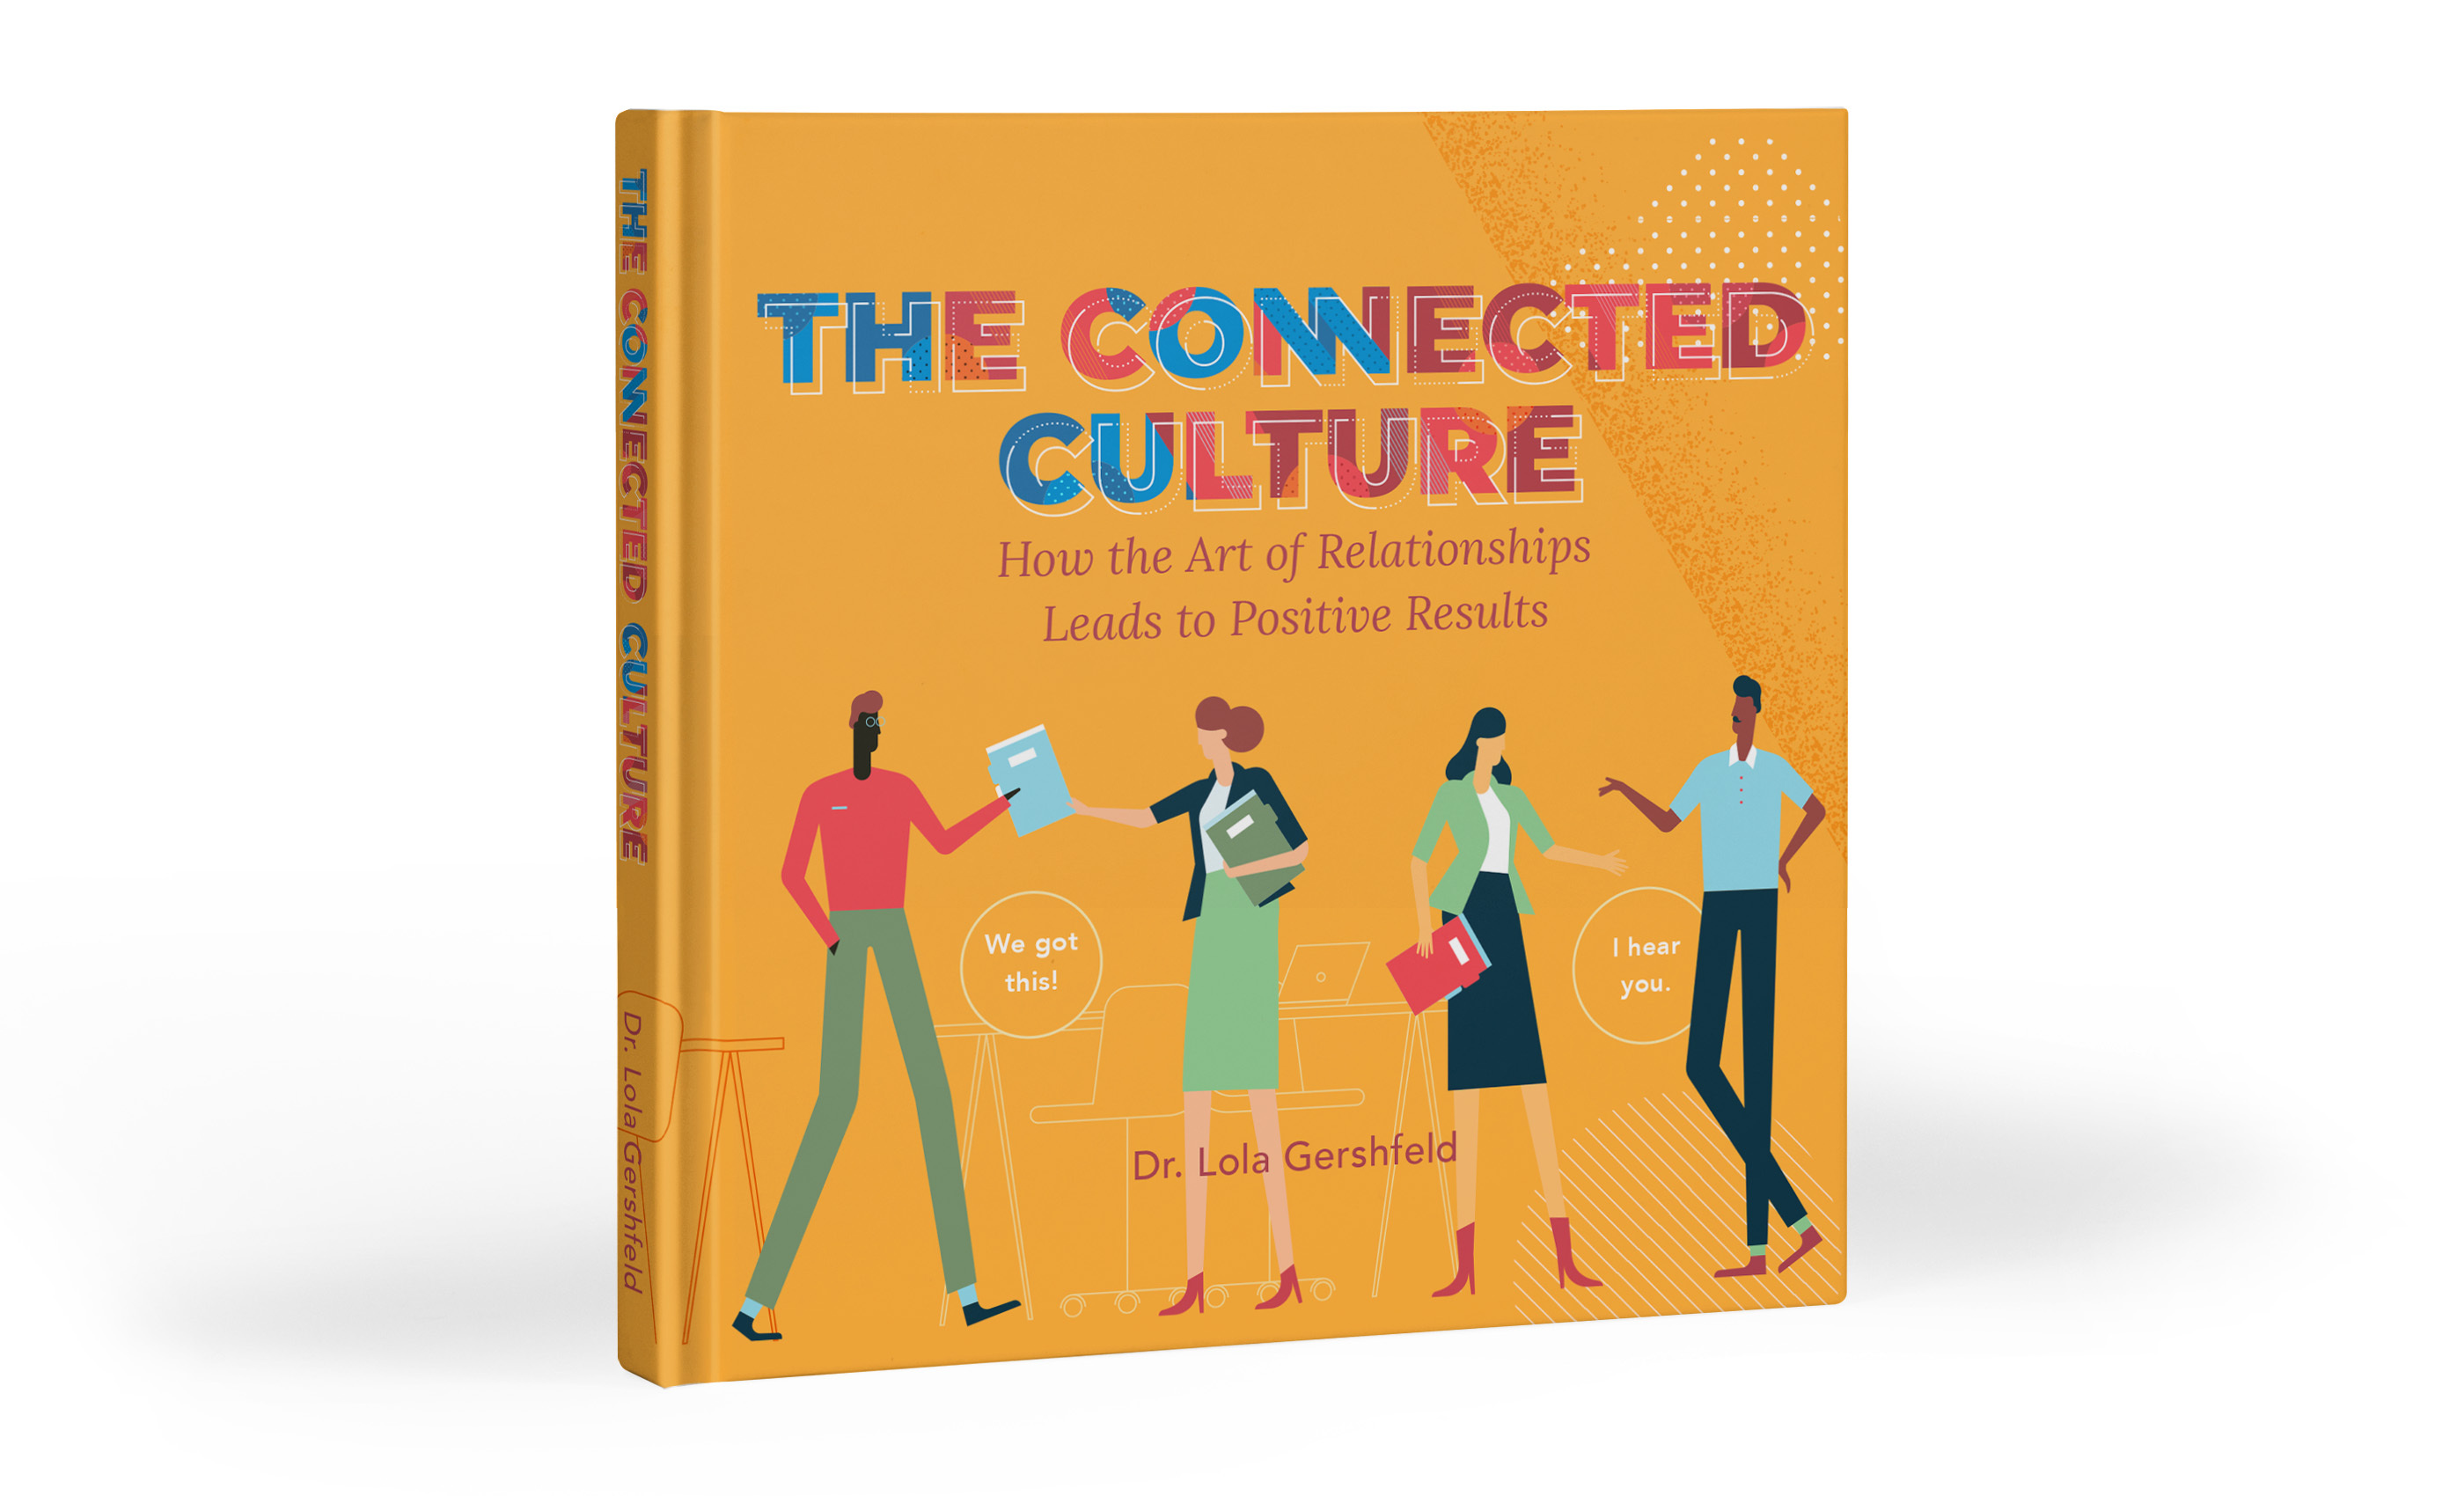 The Connected Culture book